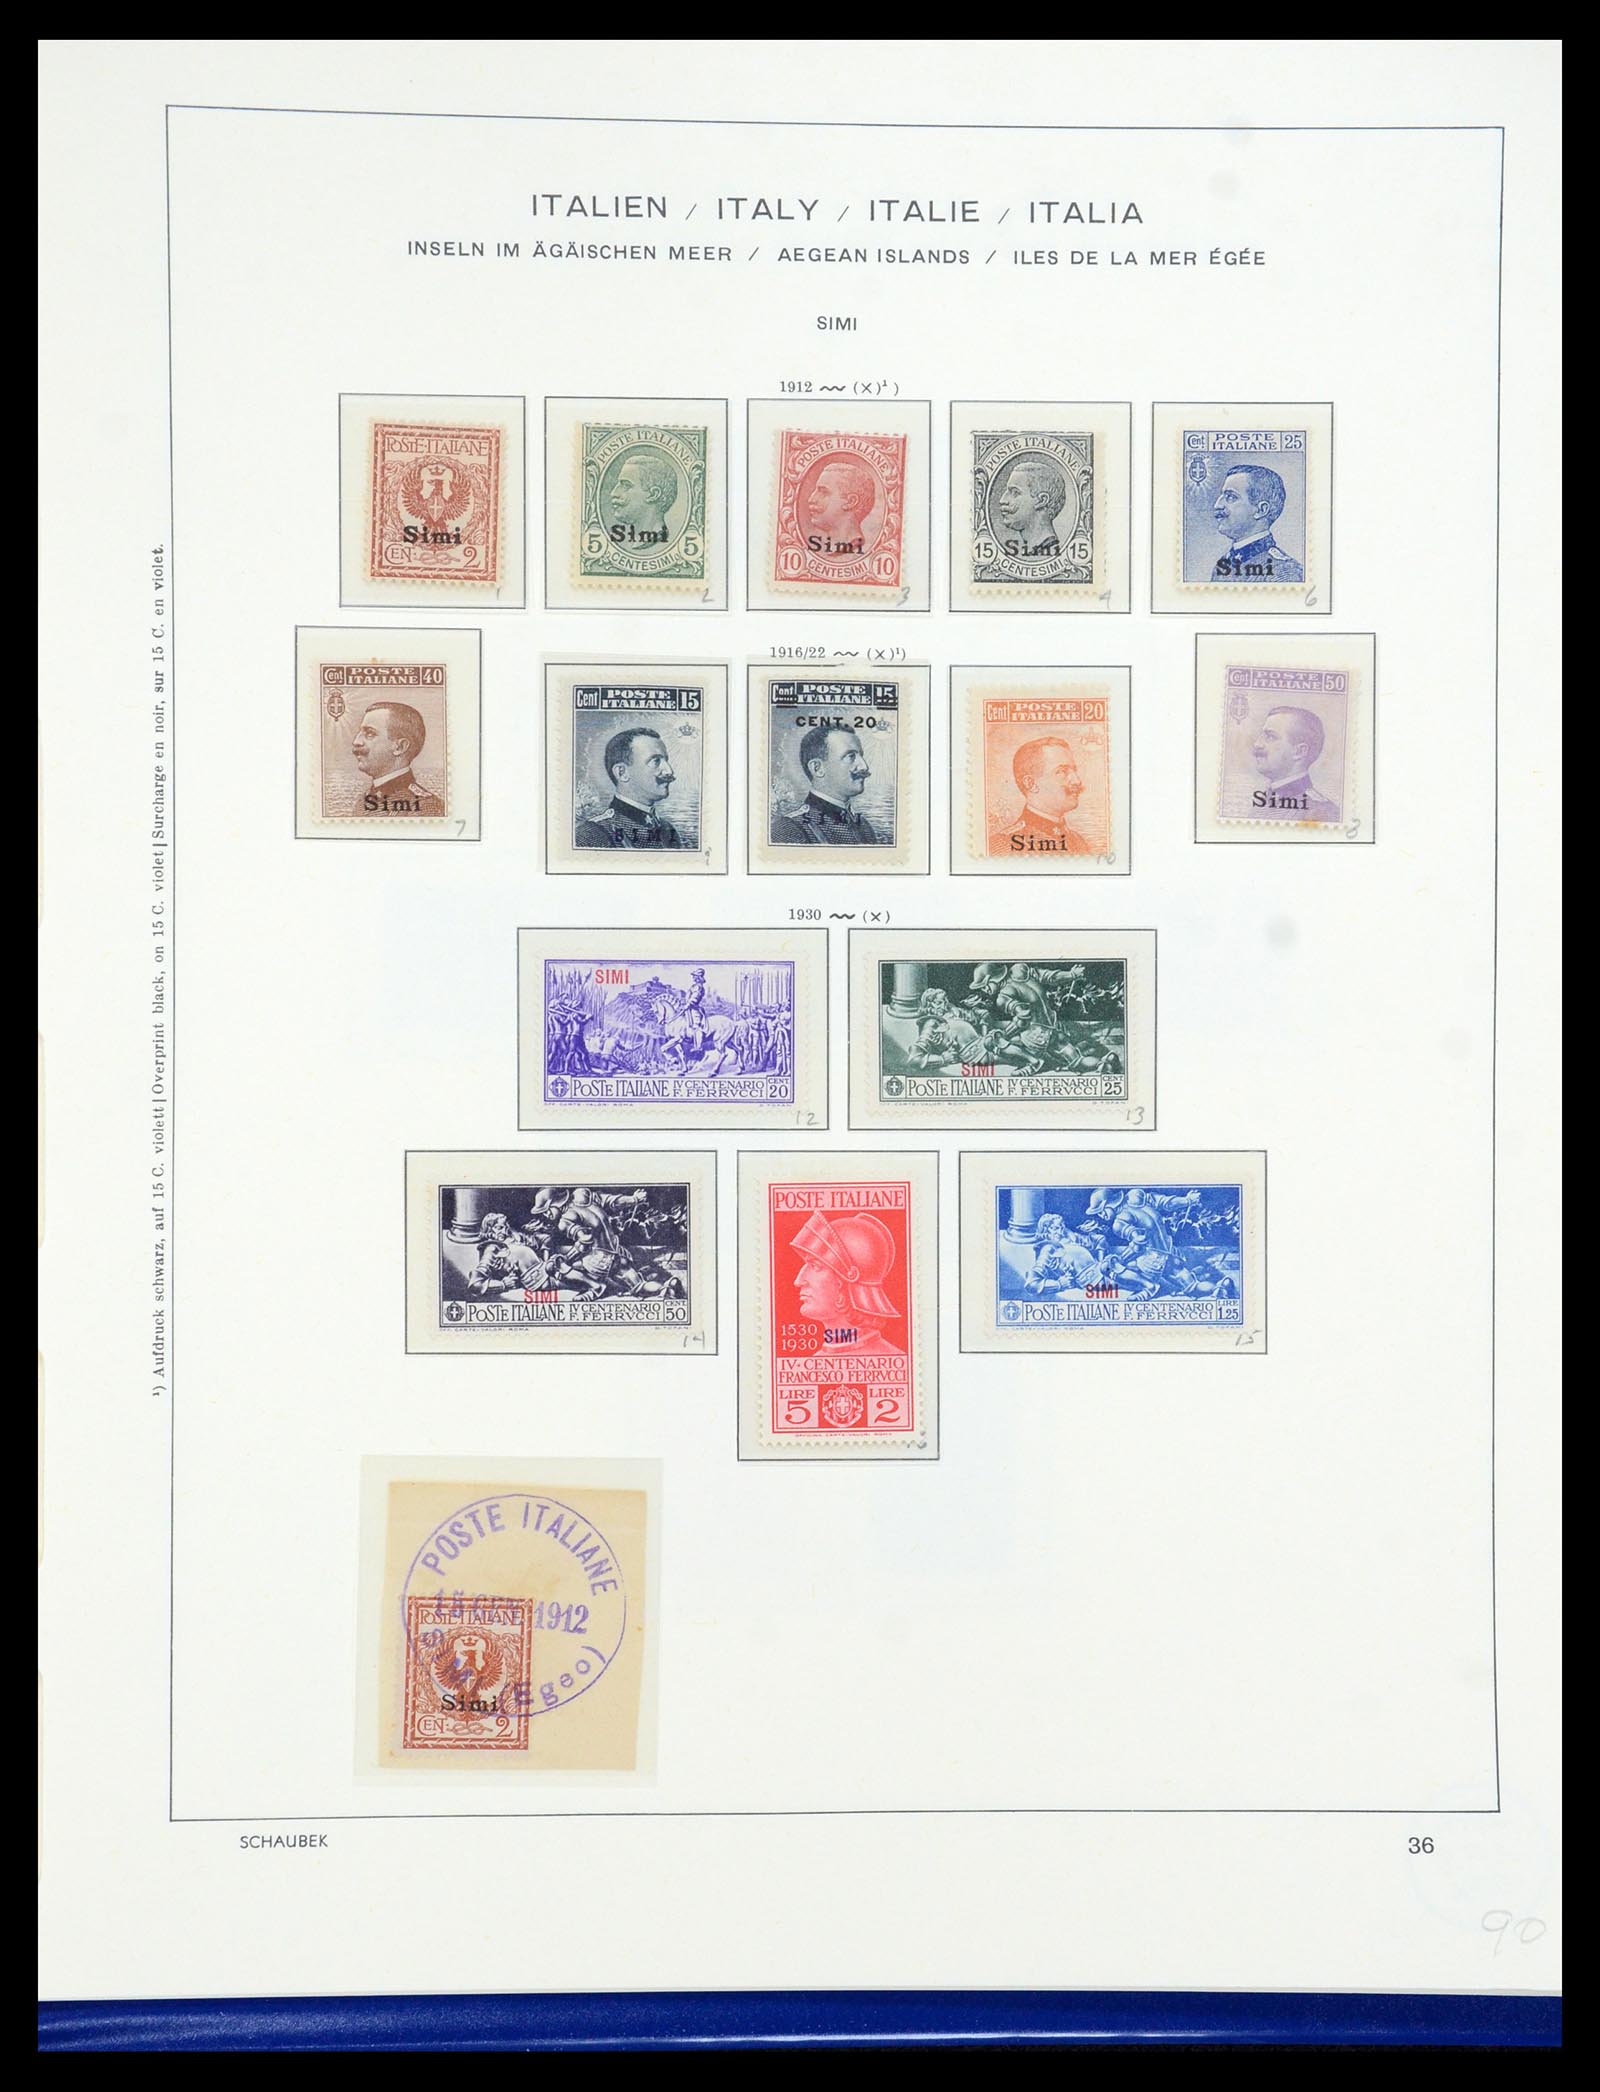 36181 051 - Stamp collection 36181 Italian Aegean Islands 1912-1941.